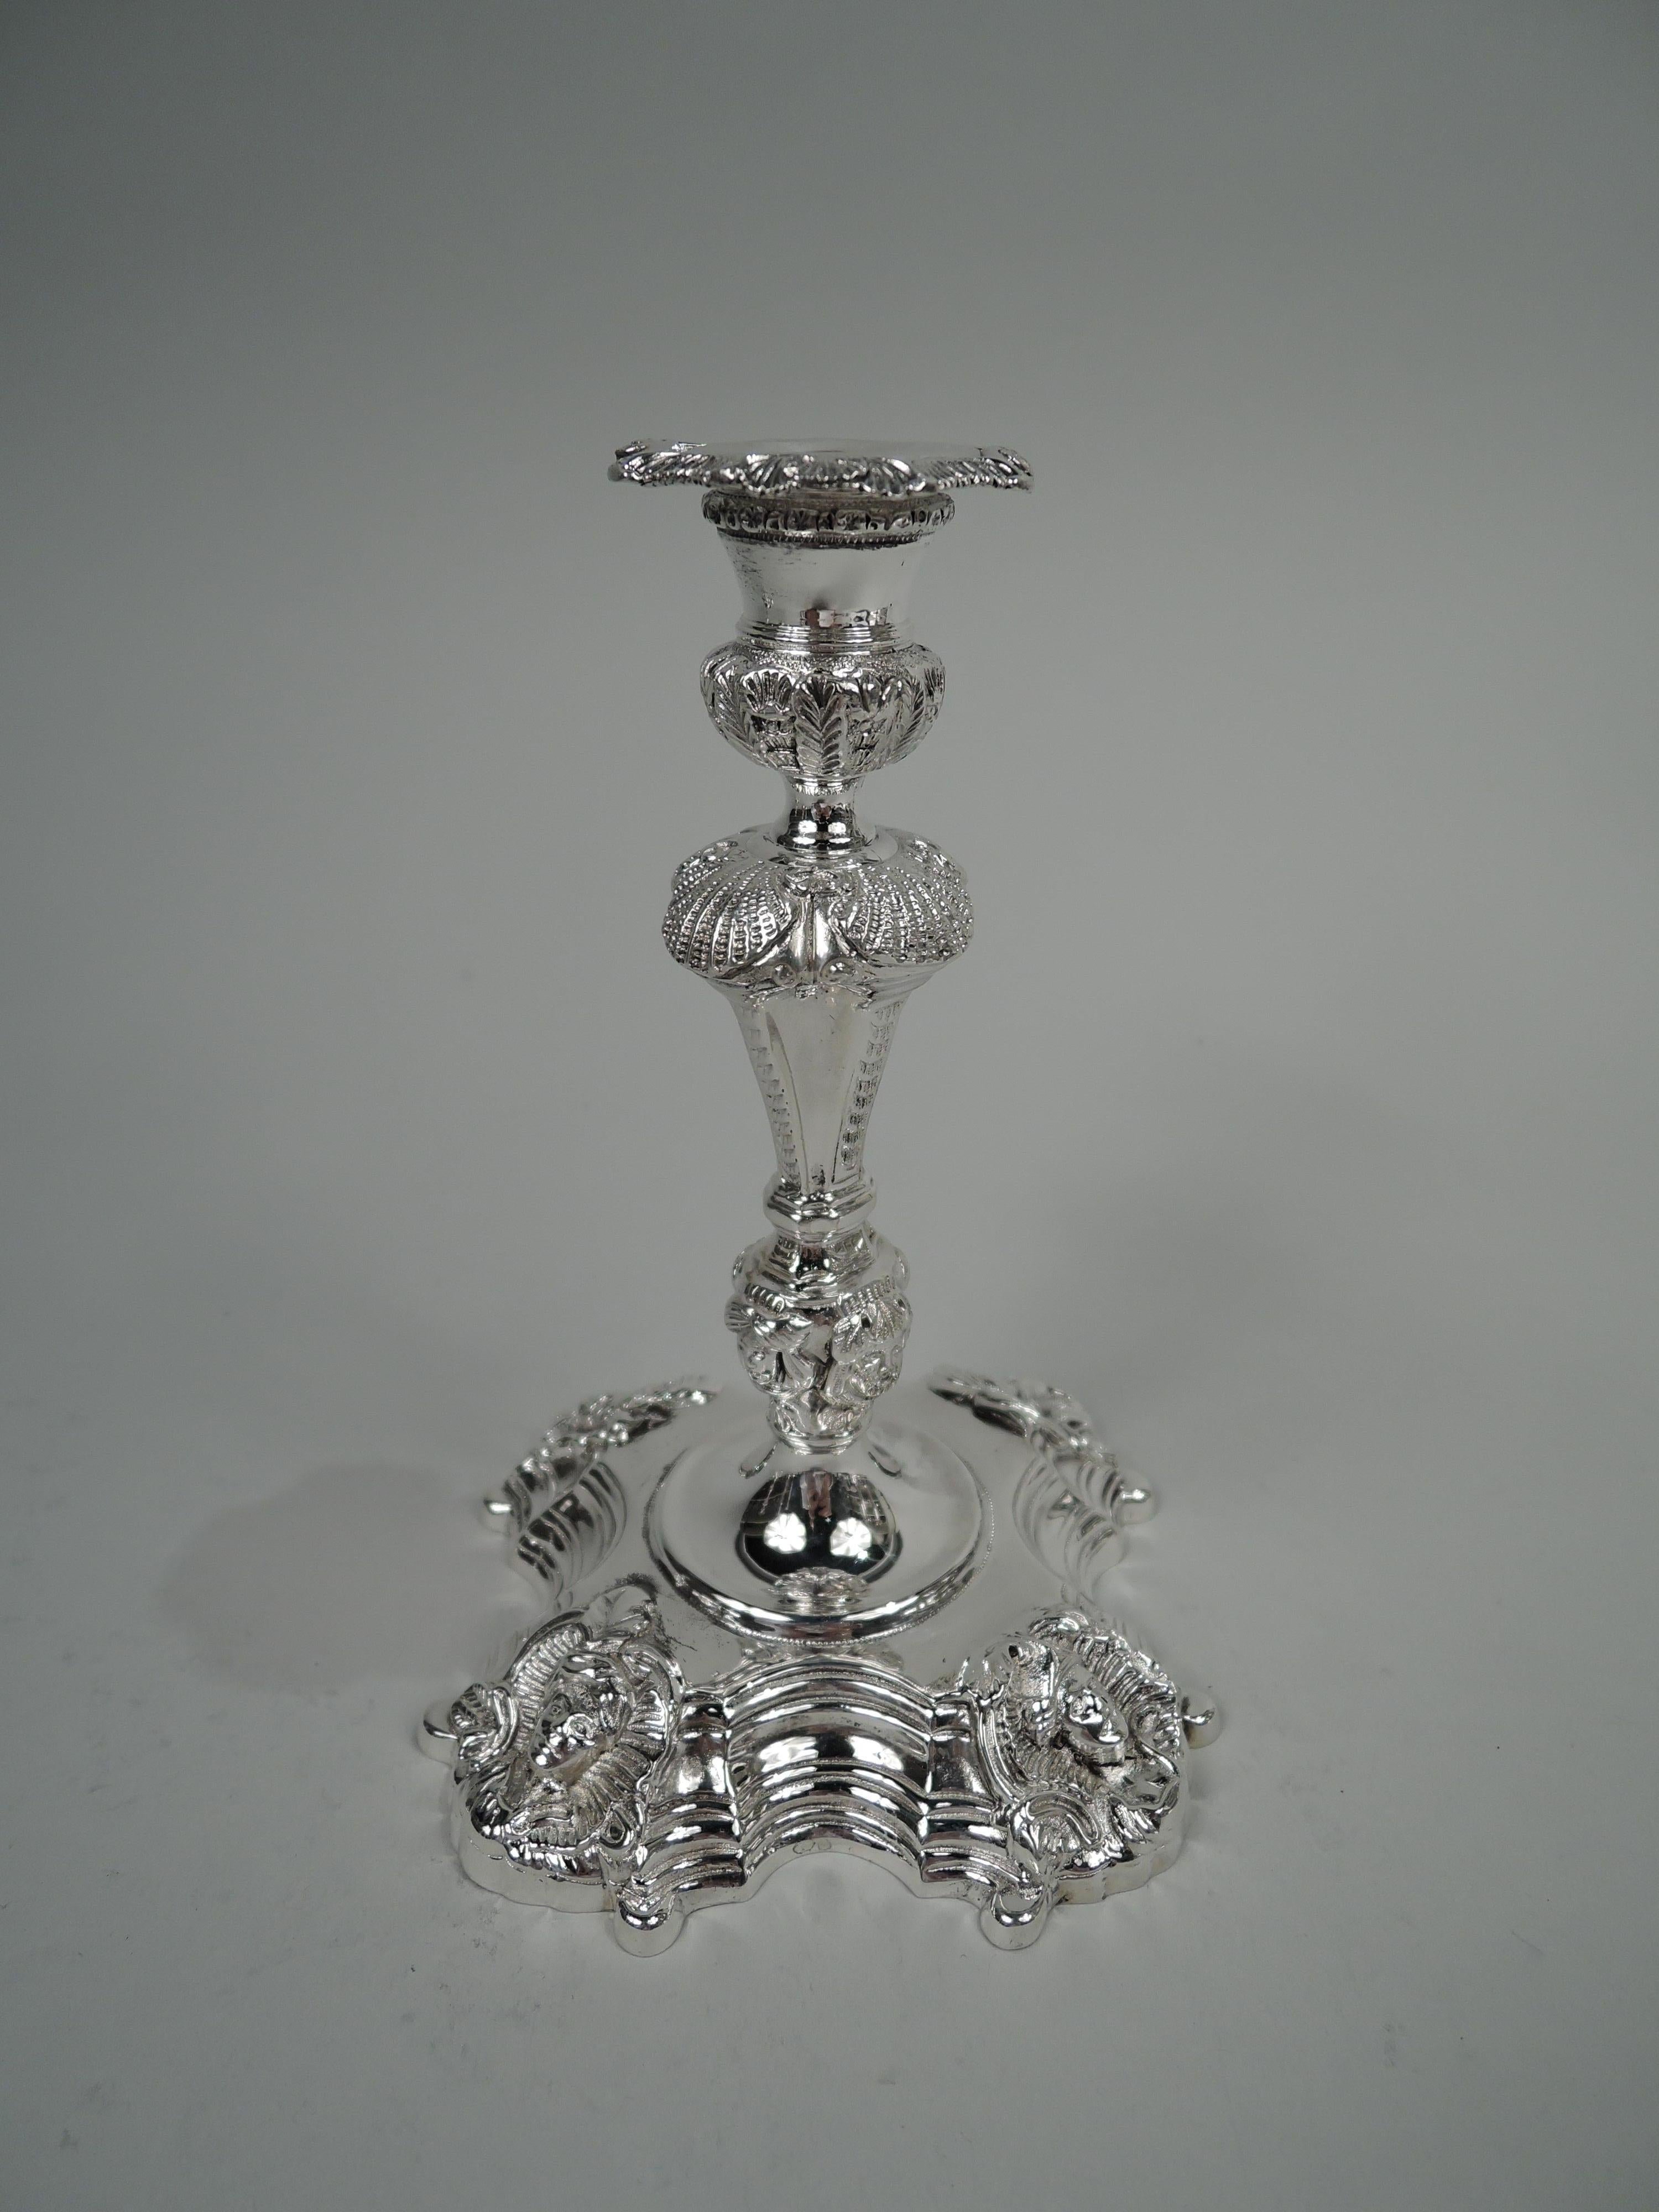 Pair of Irish Georgian cast sterling silver candlesticks. Traditional form of fluted baluster shaft on stepped serpentine foot; socket bellied with detachable cruciform bobeche. Ornament includes scallop shells and a range of human heads from